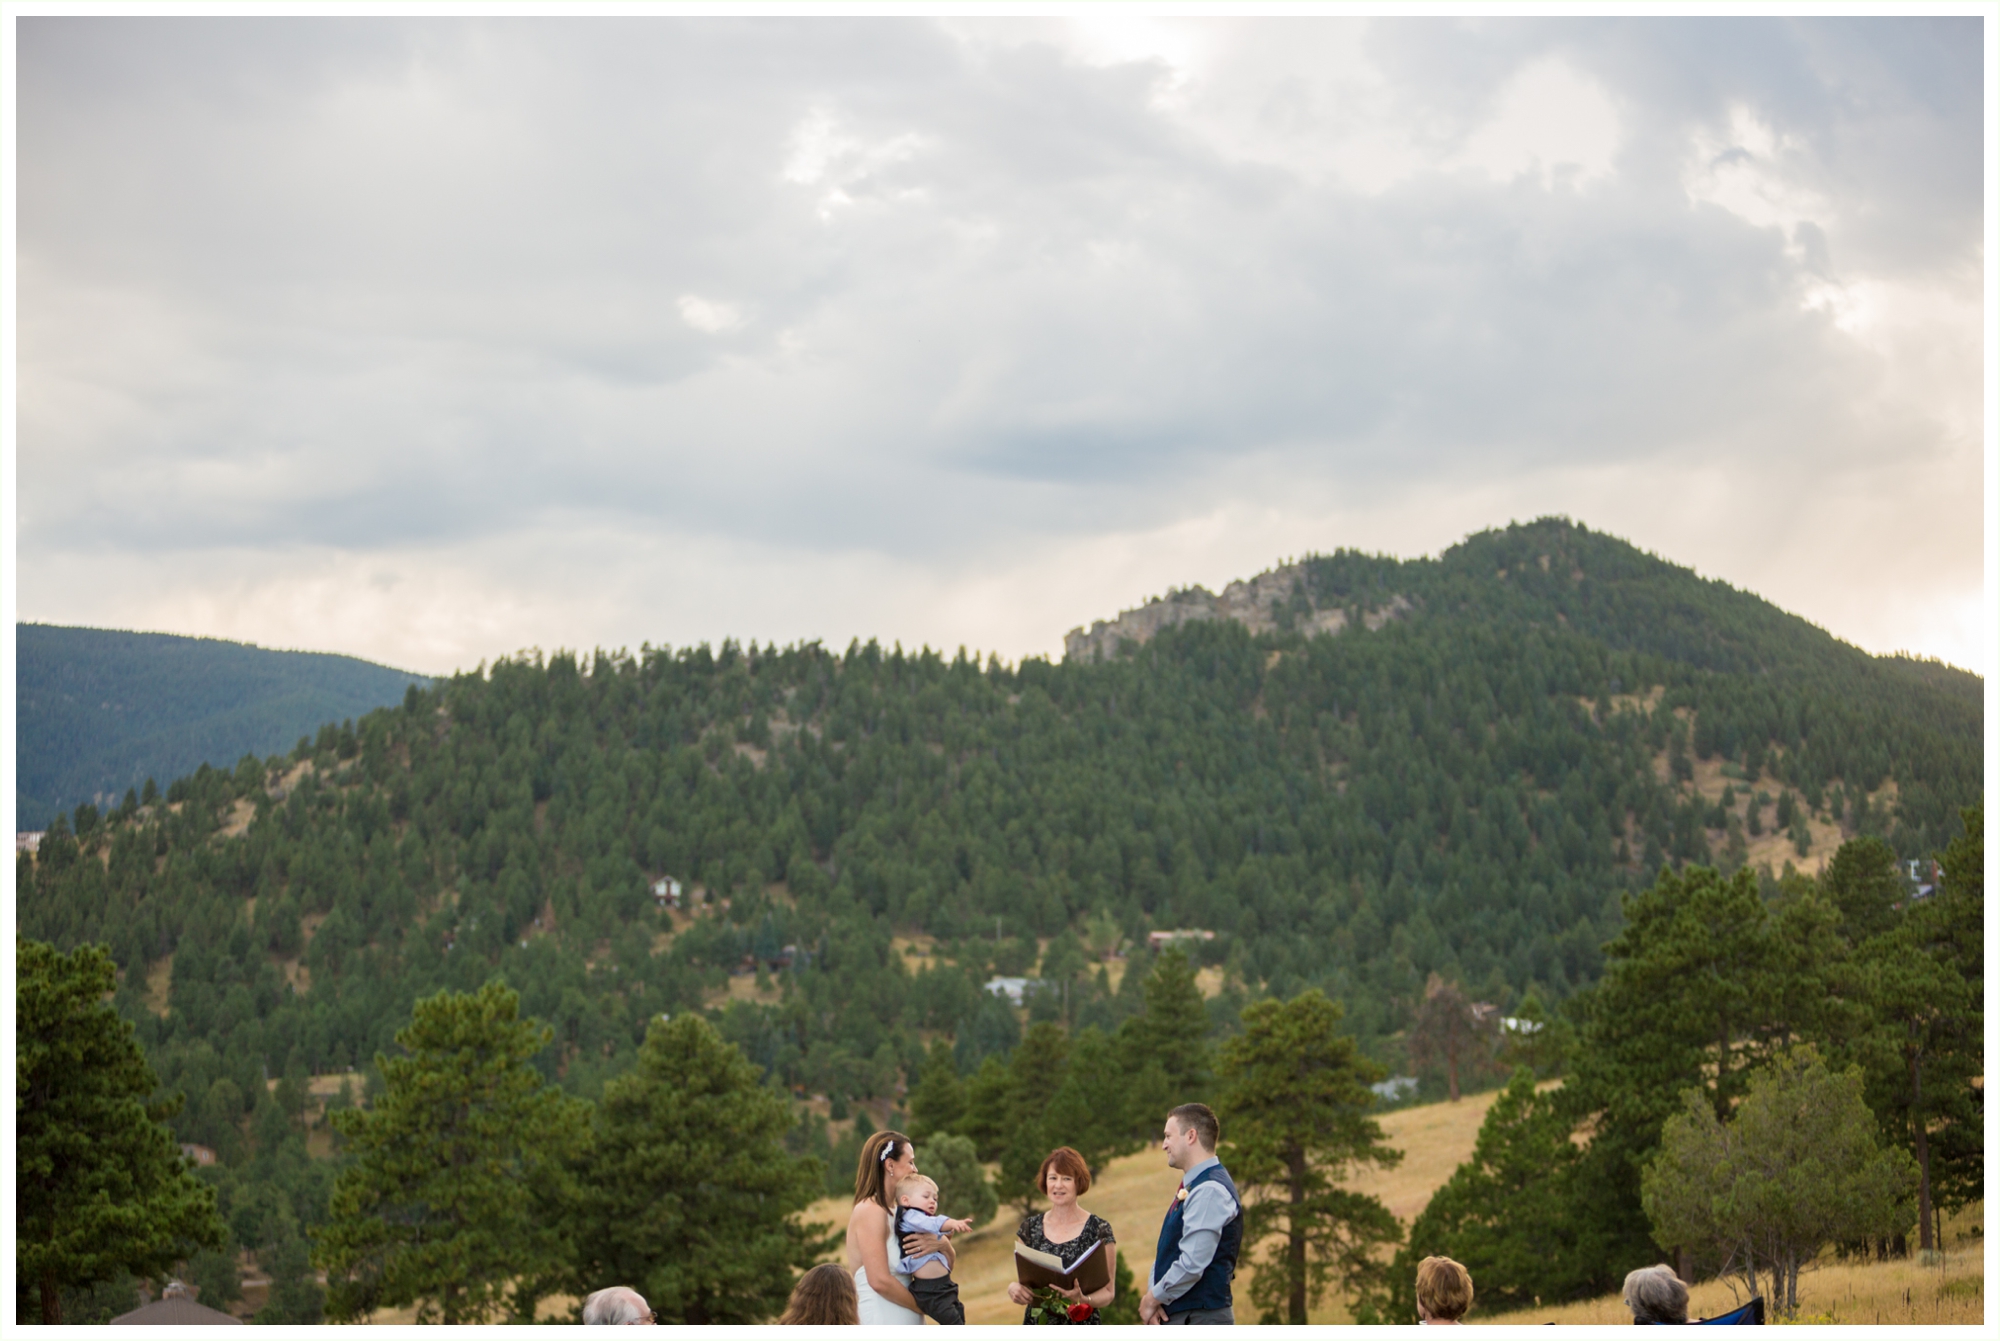 sweet candid moment during intimate elopement at betasso preserve boulder colorado wedding ceremony